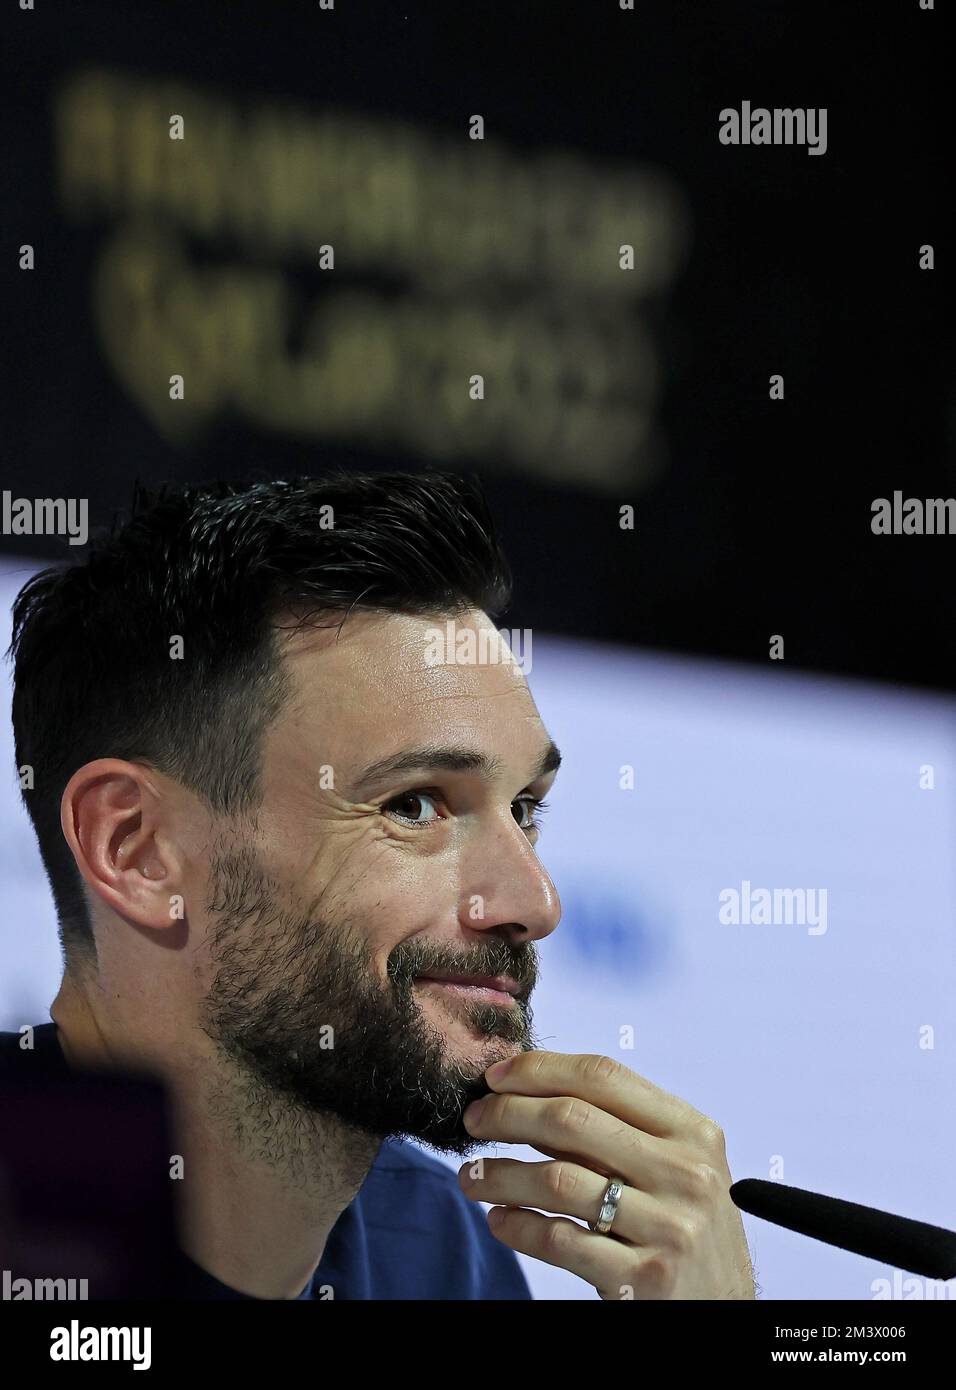 Hugo Lloris of France press conference during the FIFA World Cup Qatar 2022 match at the Media Center on Dec 17, 2022 in Doha Qatar. (Photo by Heuler Andrey / Dia Esportivo / PRESSIN) Stock Photo